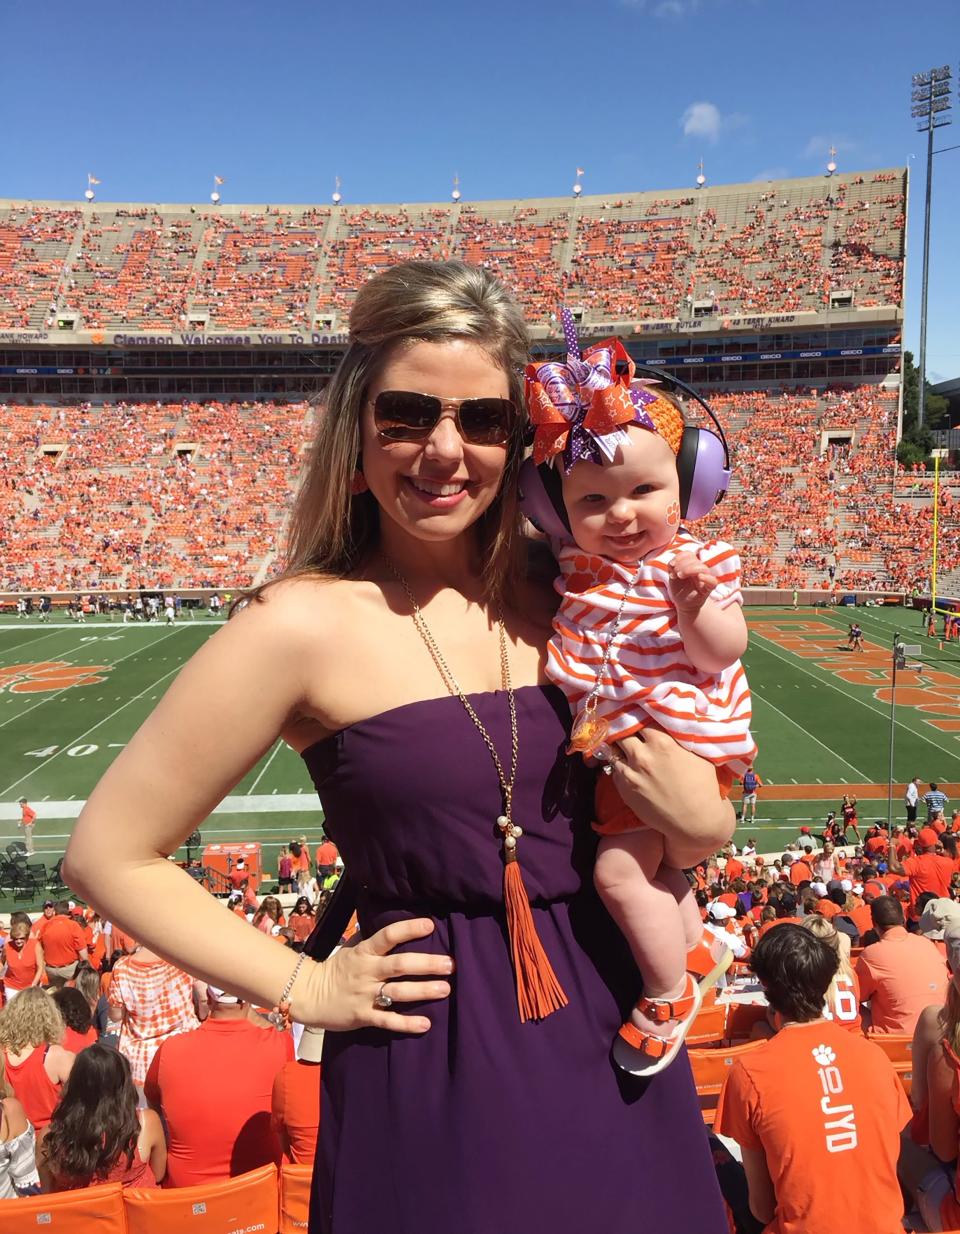 Carissa Parnell and one of her children at a Clemson University football game.